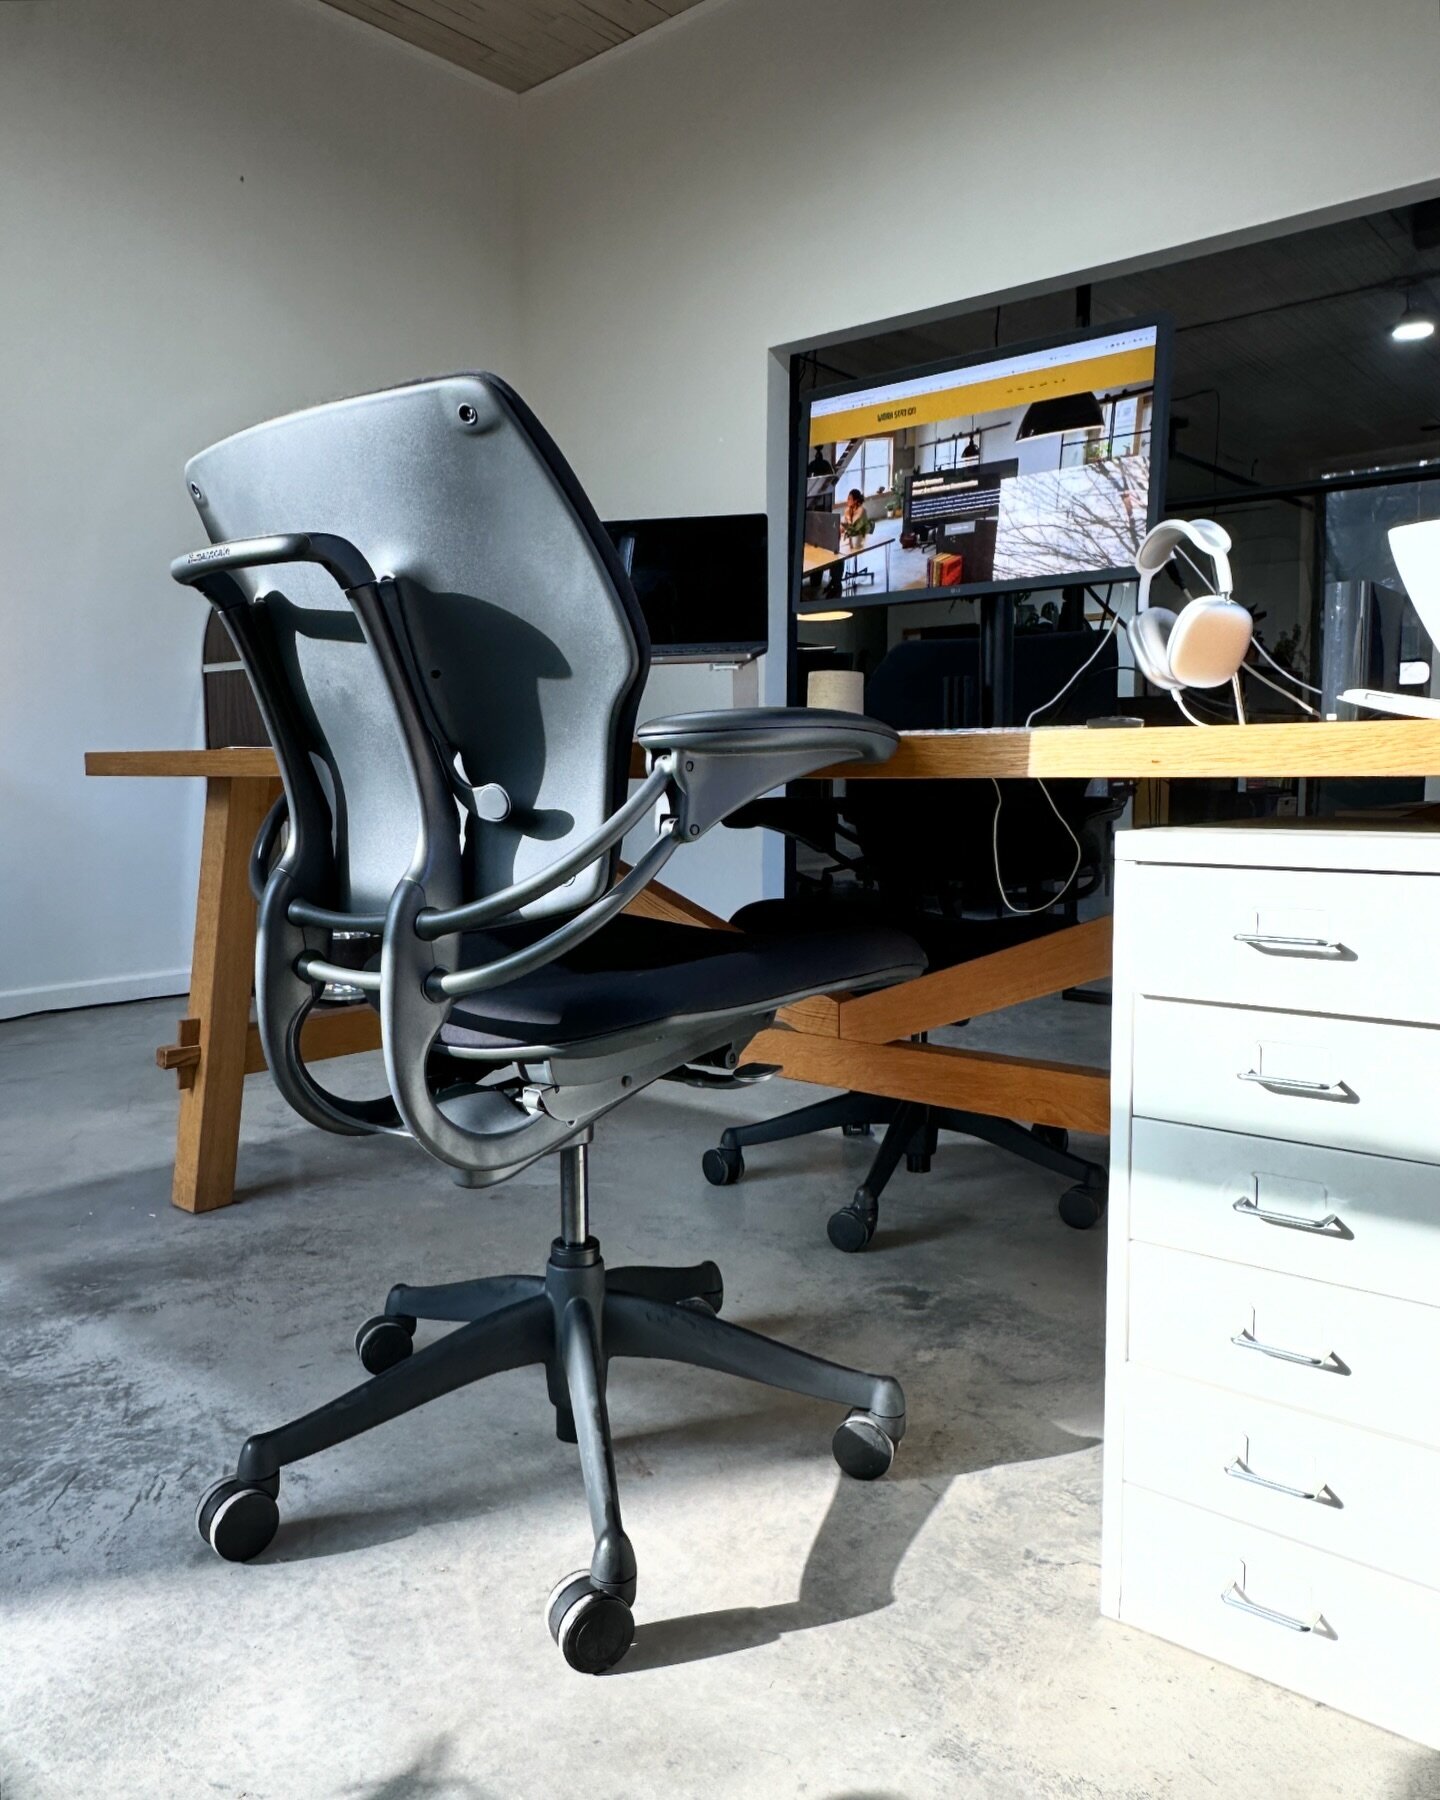 &quot;Your dreams may take flight, but it all begins with a well-cushioned seat.&quot; LOL ChatGPT got real creative with this one. 

- Work Station upgrade all 12 desk chairs this week. Come check these out, there&rsquo;s a desk opening up.